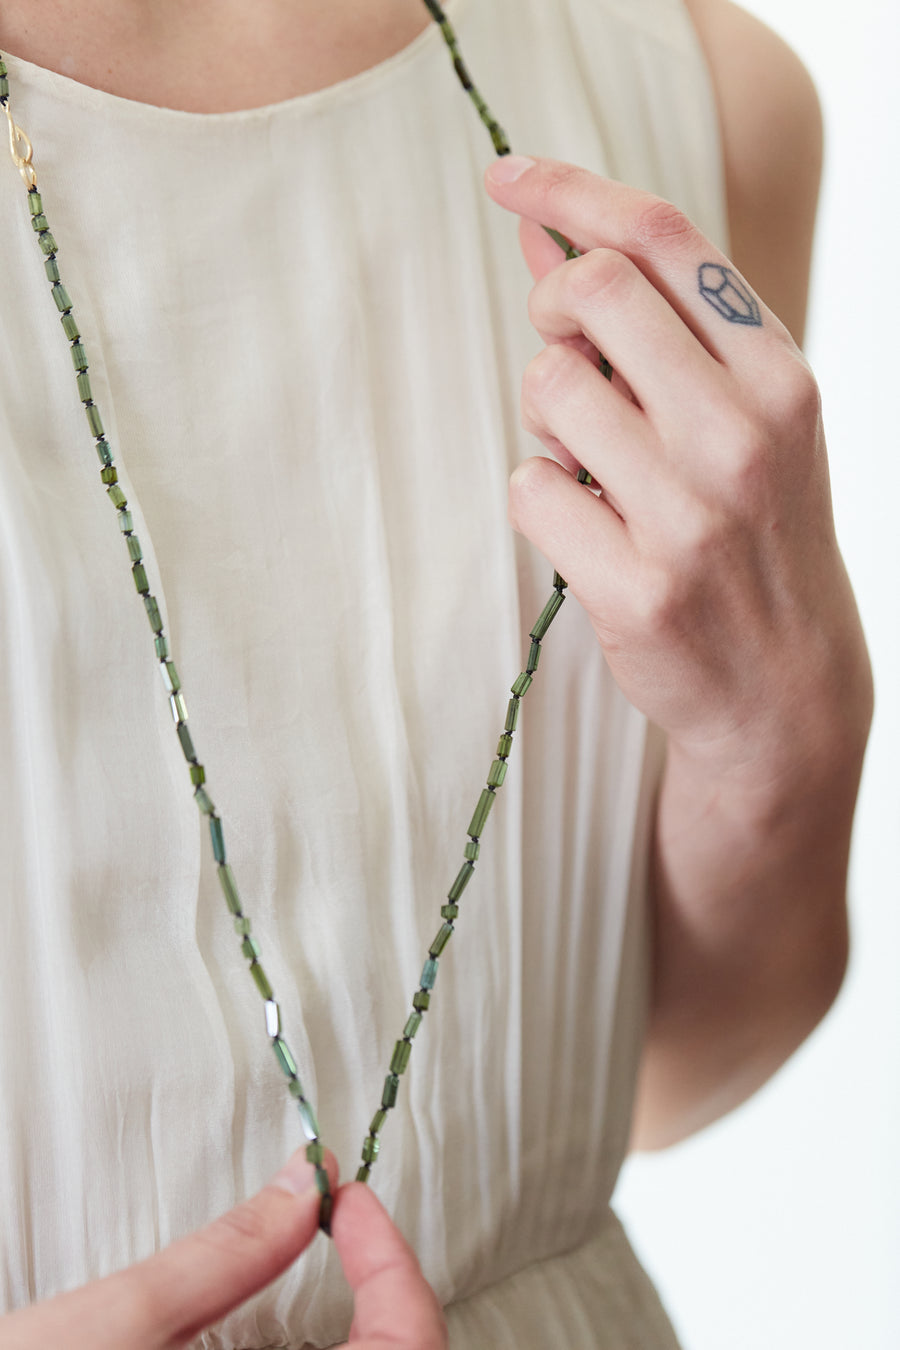 Green Tourmaline beaded necklace by Hannah Blount